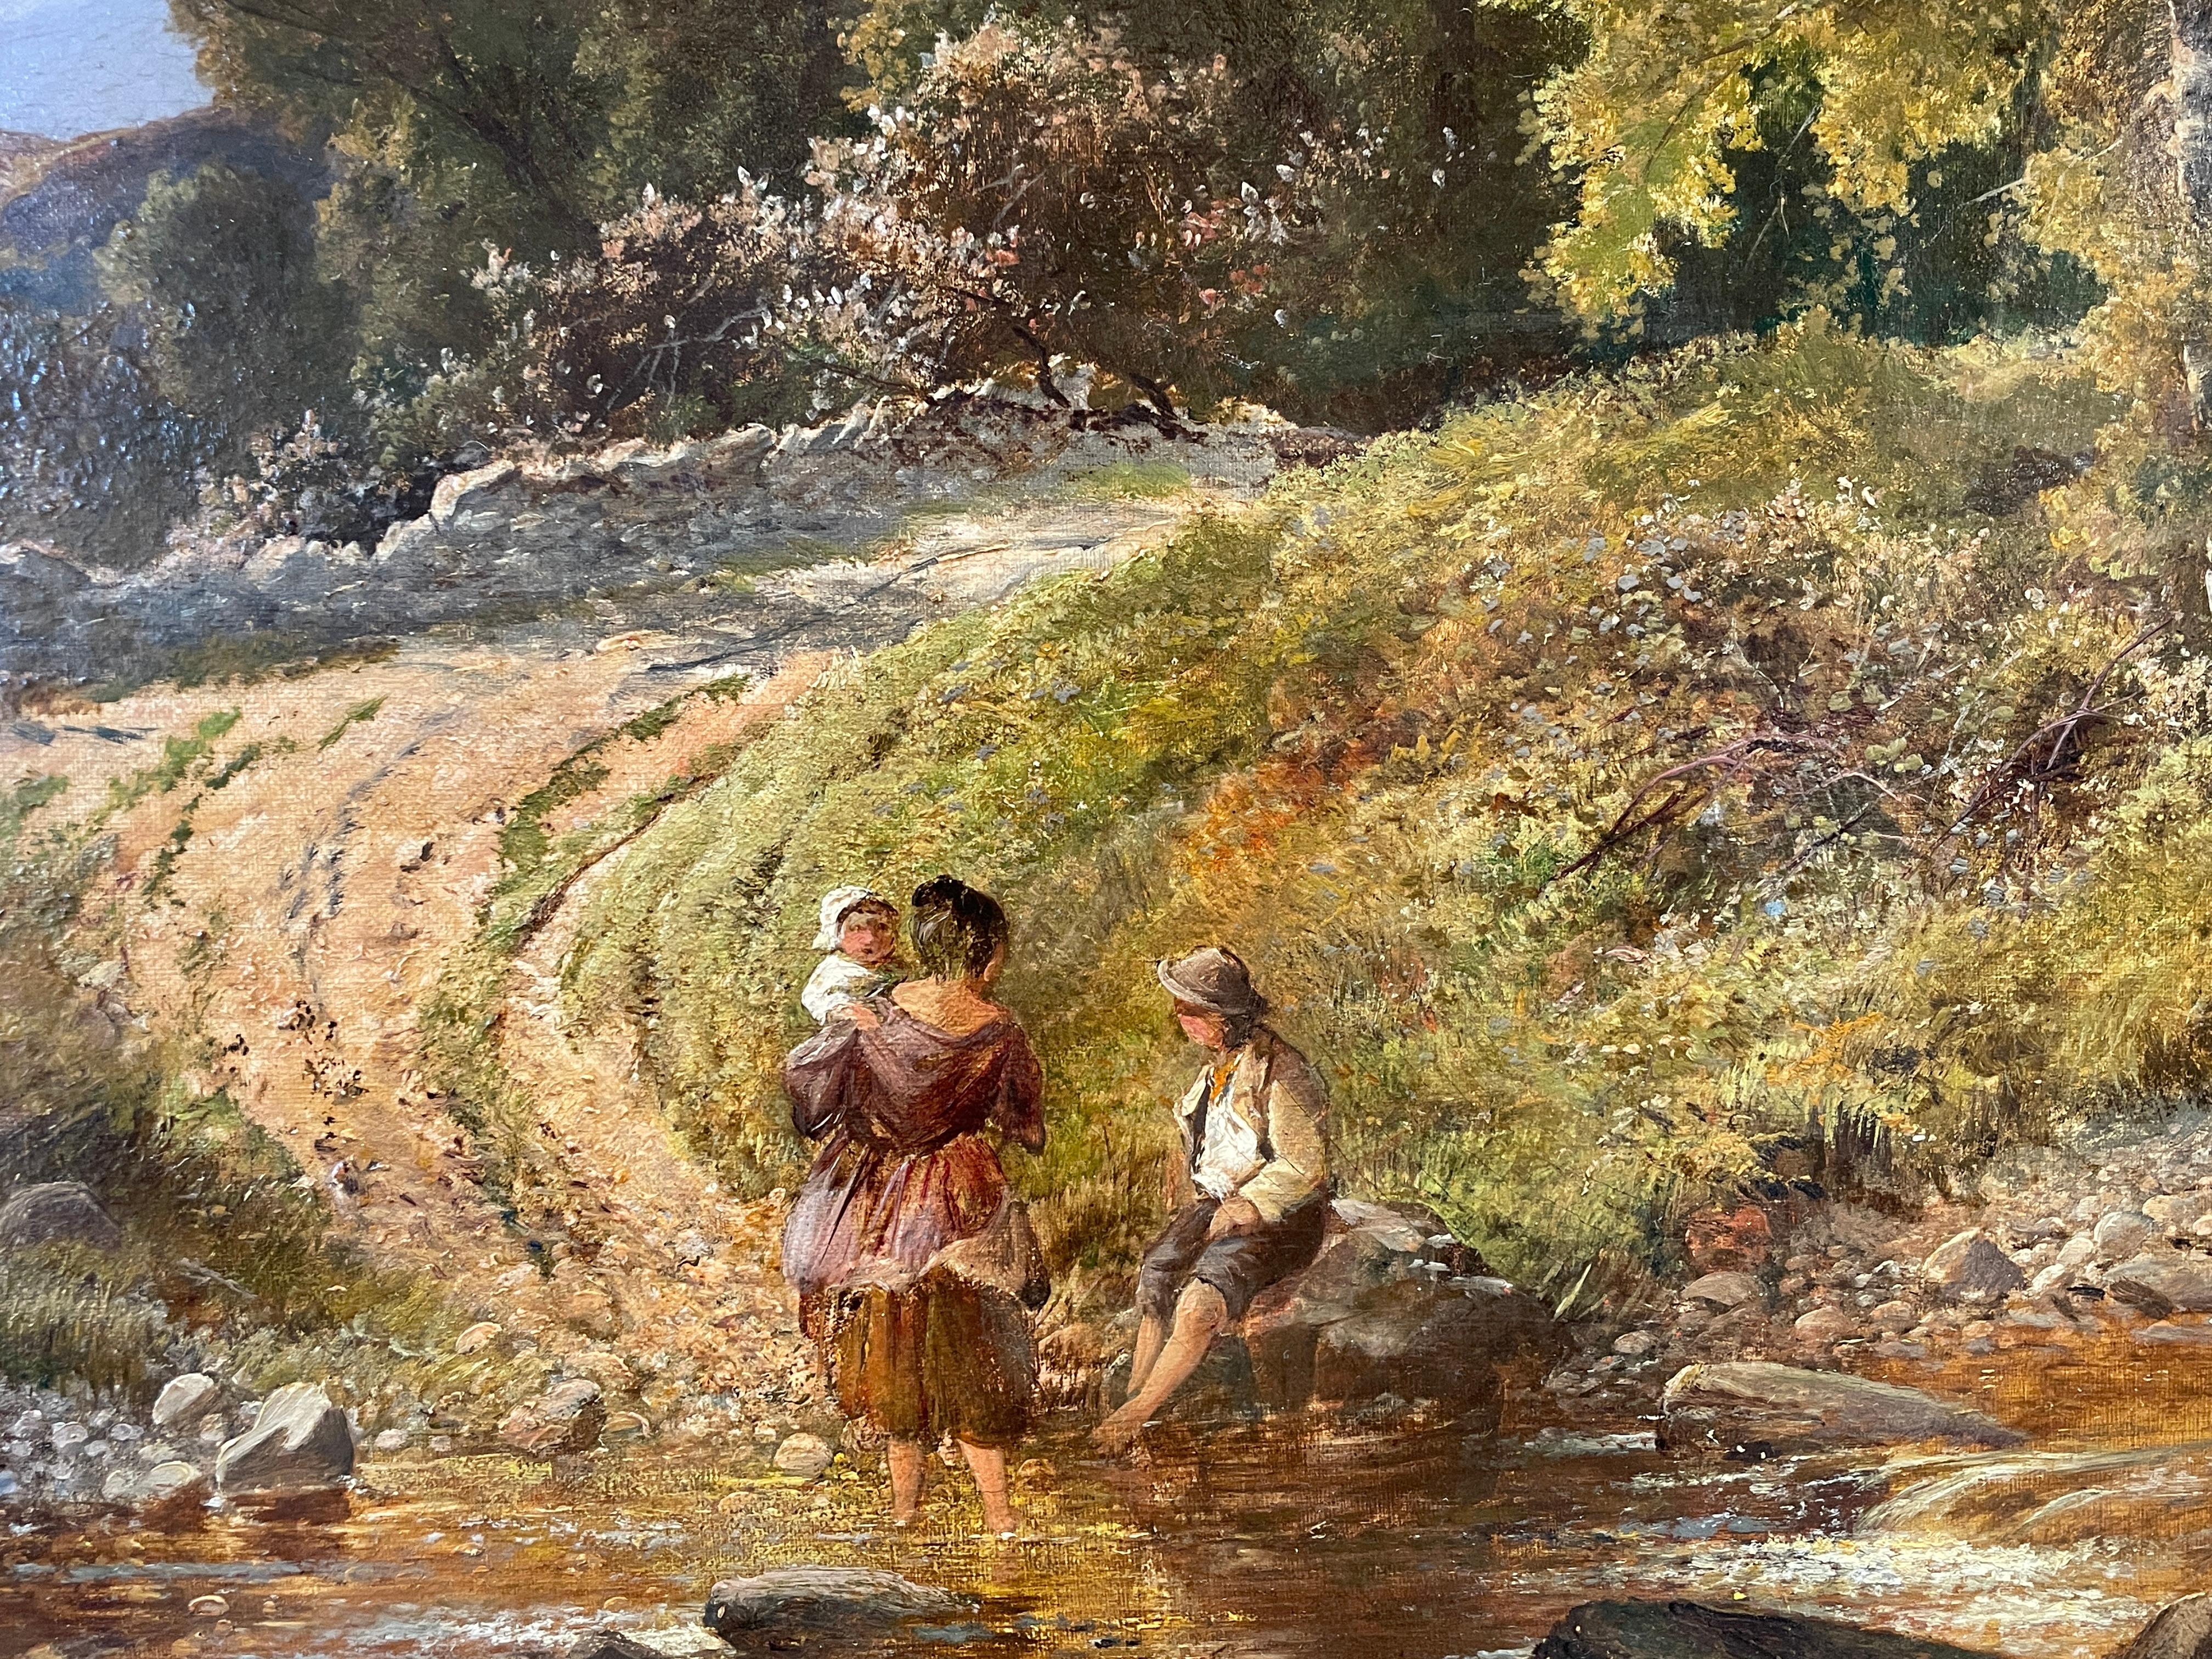 'Wading in the River' by Benjamin Williams Leader. A 19th century landscape painting of figures and baby wading in a river. Surrounded by lush greenery. This highly detailed painting by this notorious 19th century artist is a brilliant example of